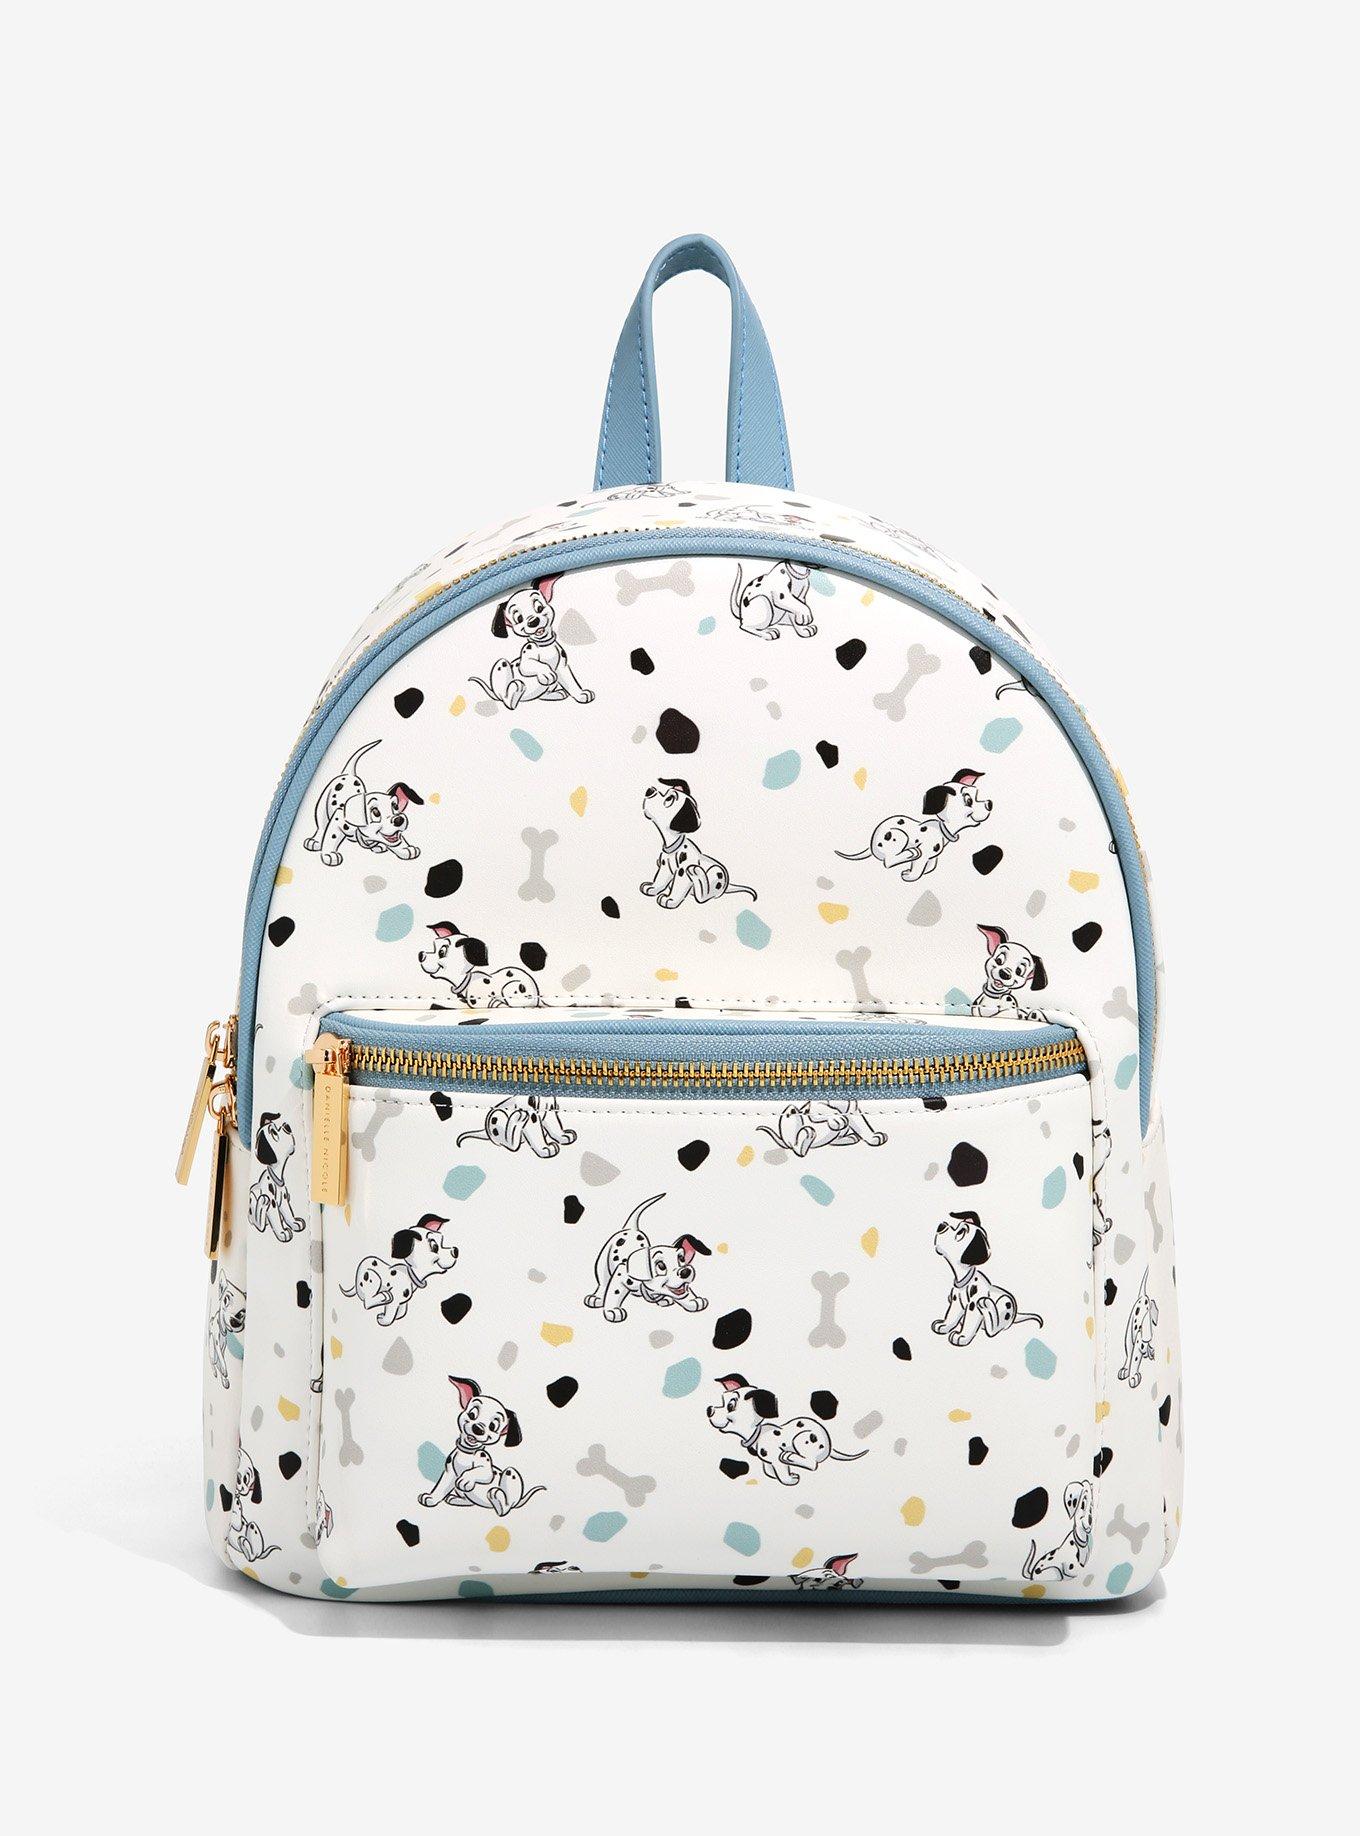 Real Littles 101 Dalmatians Backpack- Collectible Micro Disney Backpack with 7 Surprises Inside!